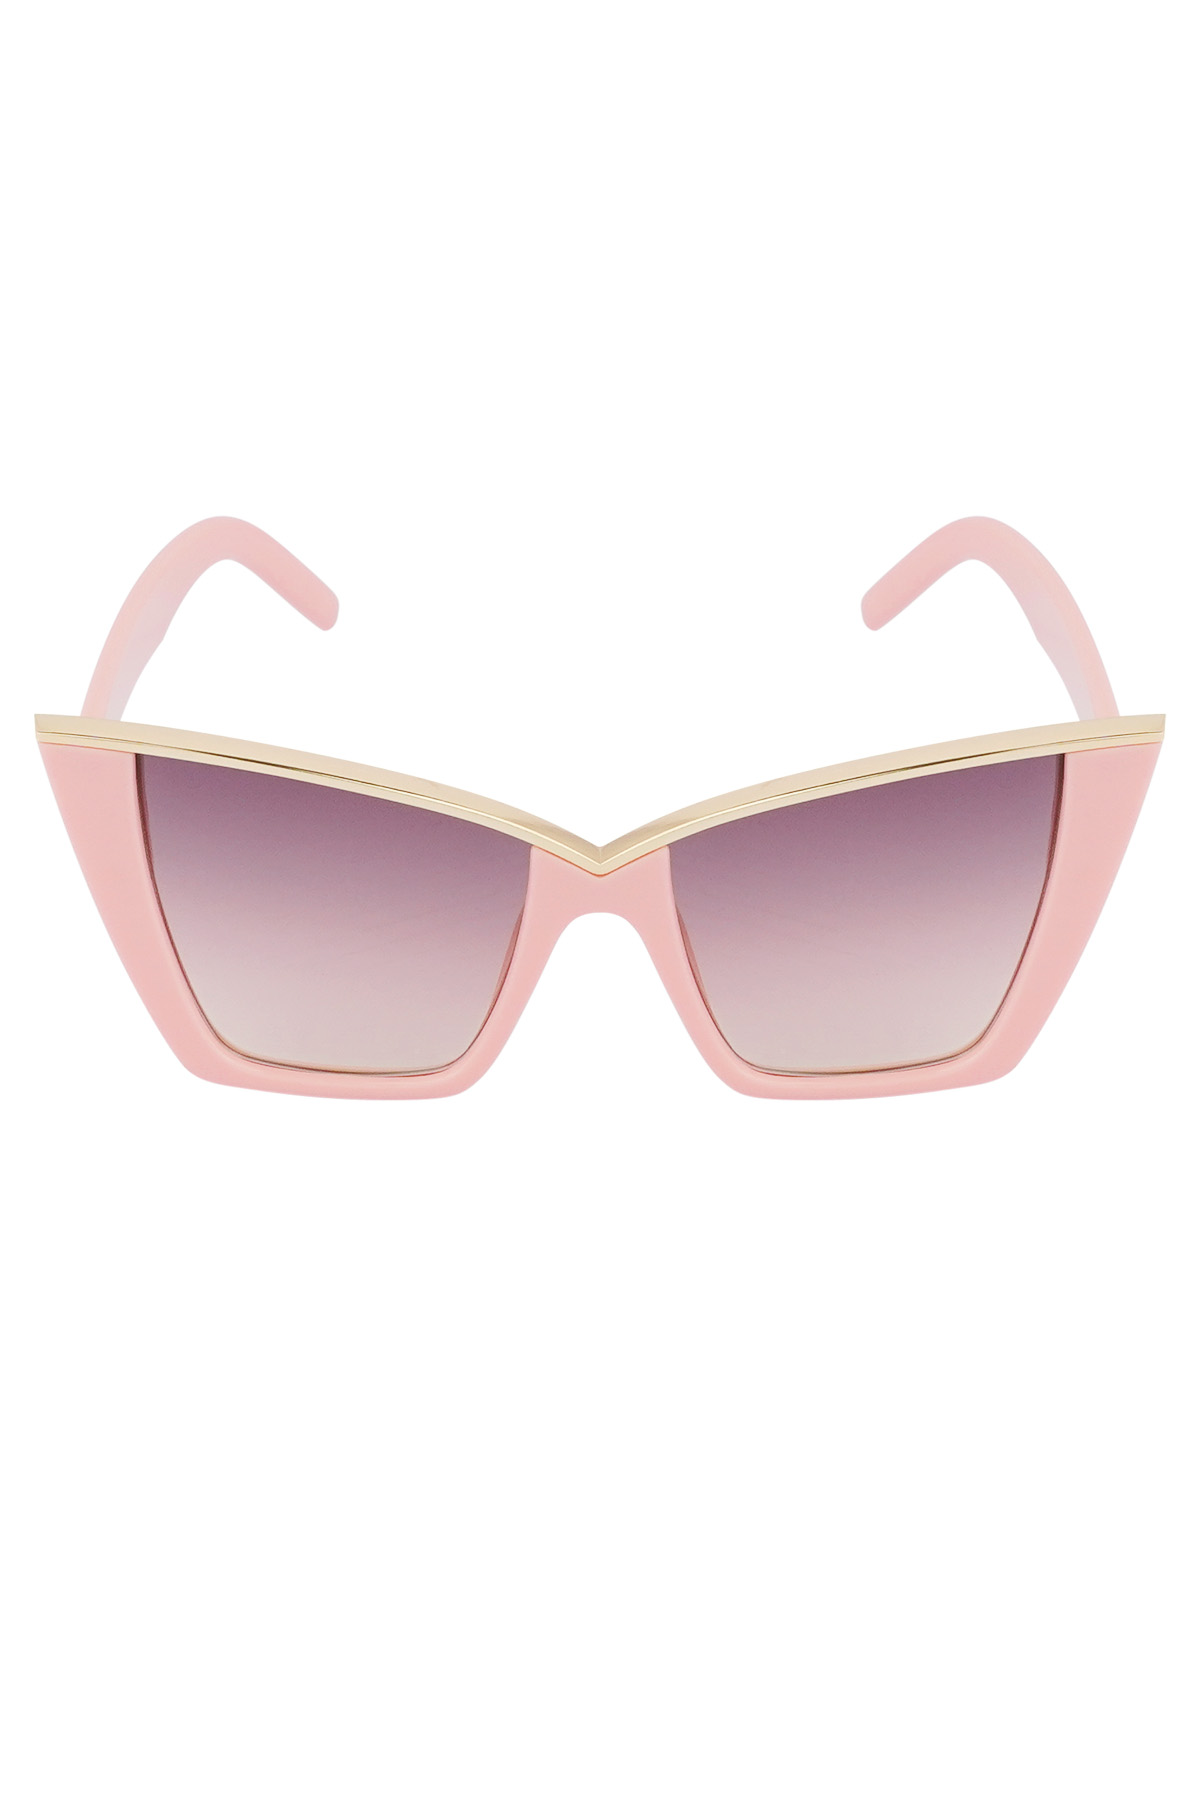 Chic sunglasses - pink  h5 Picture4